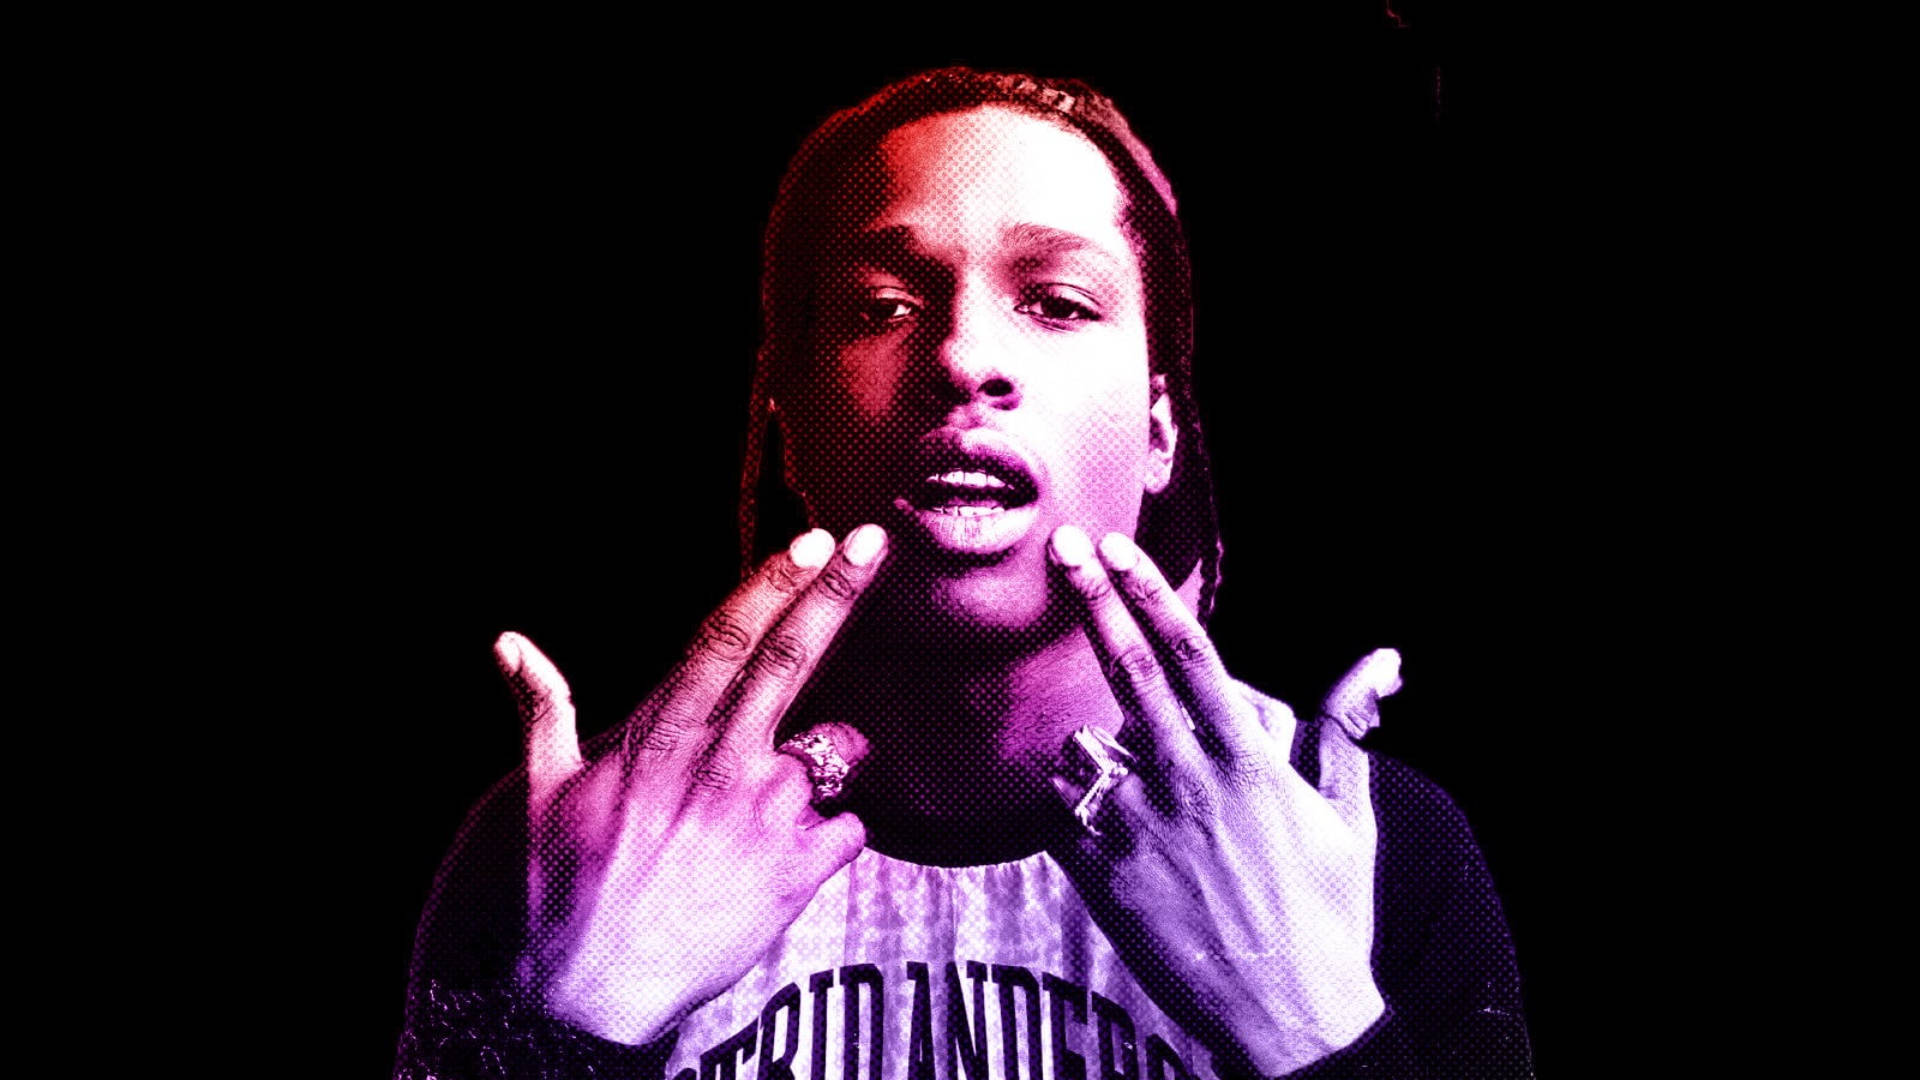 1920X1080 Asap Rocky Wallpaper and Background